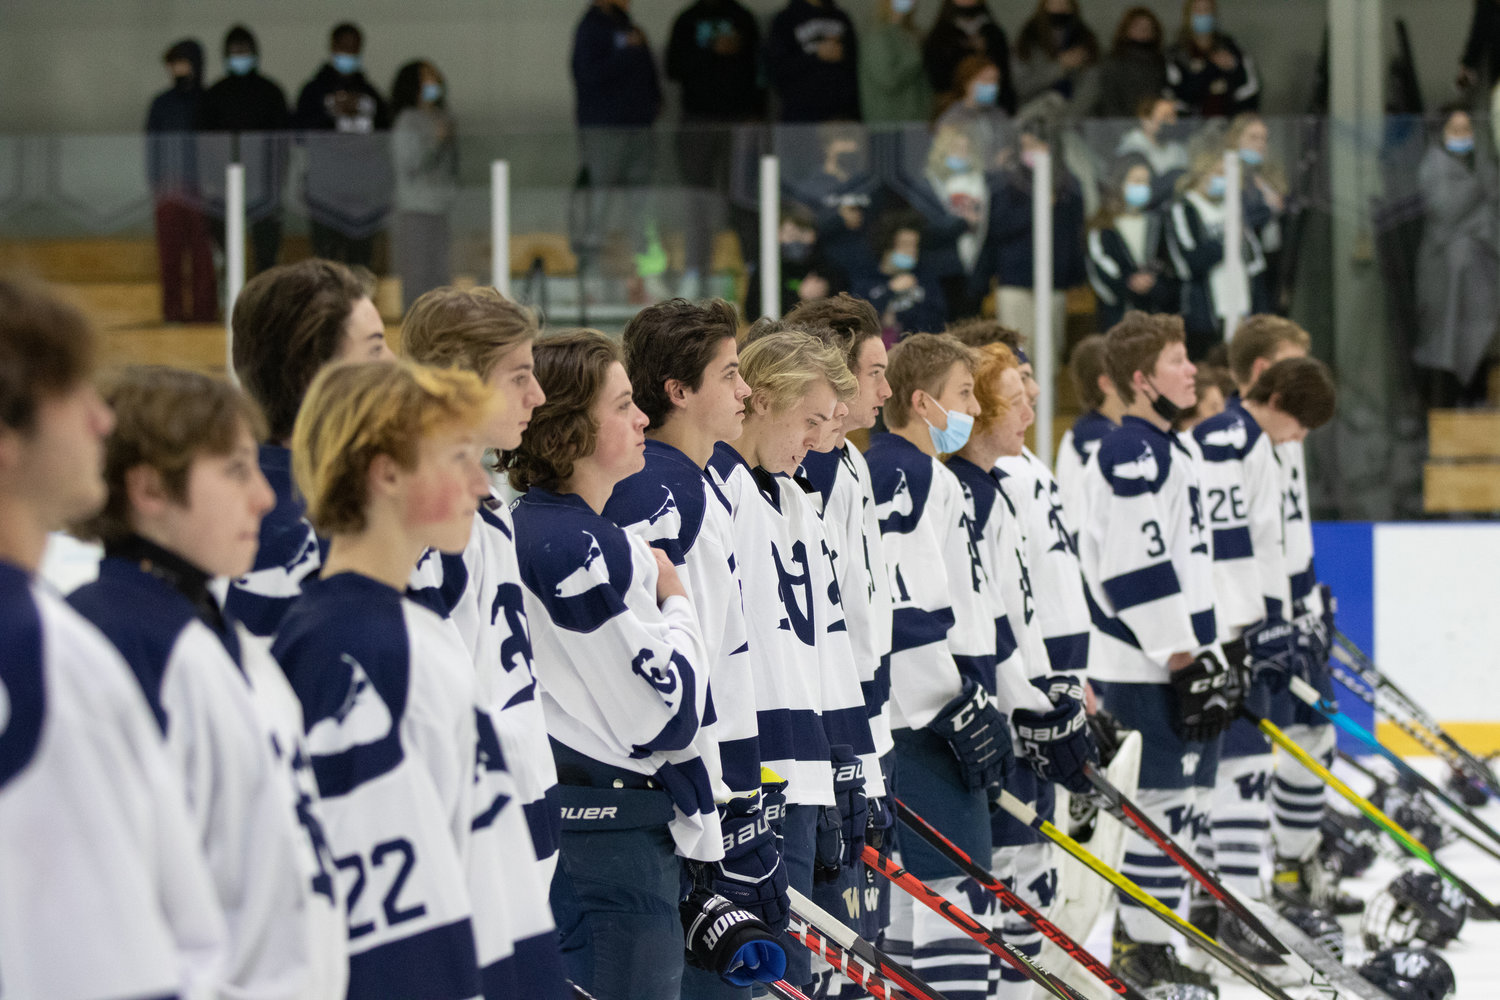 Boys hockey lining up before a game this season.